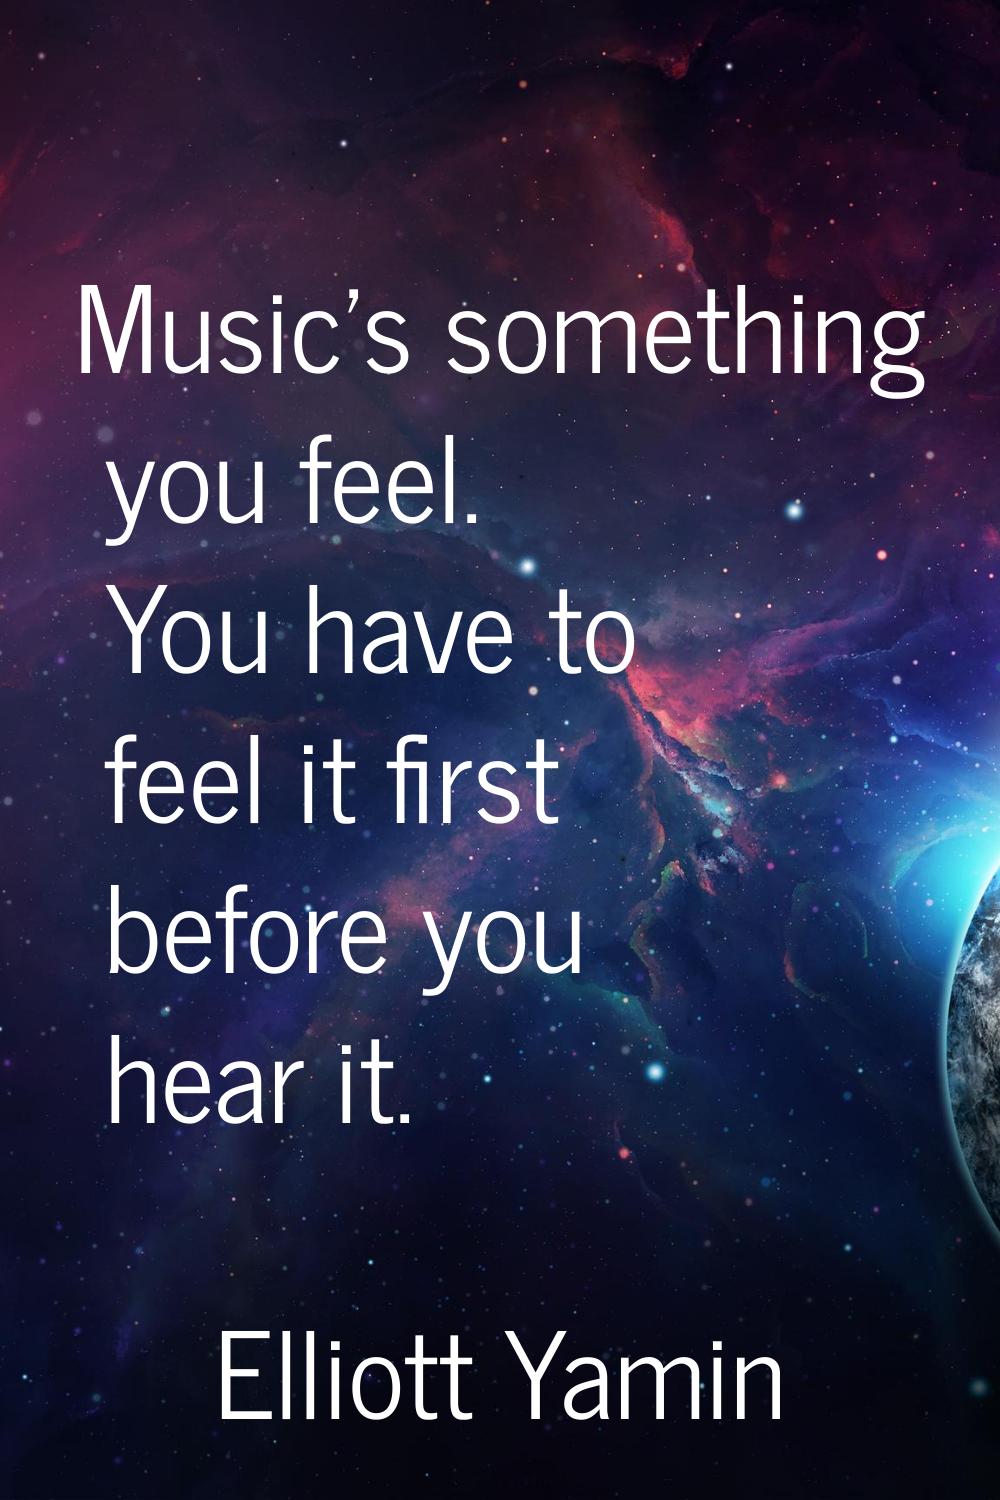 Music's something you feel. You have to feel it first before you hear it.